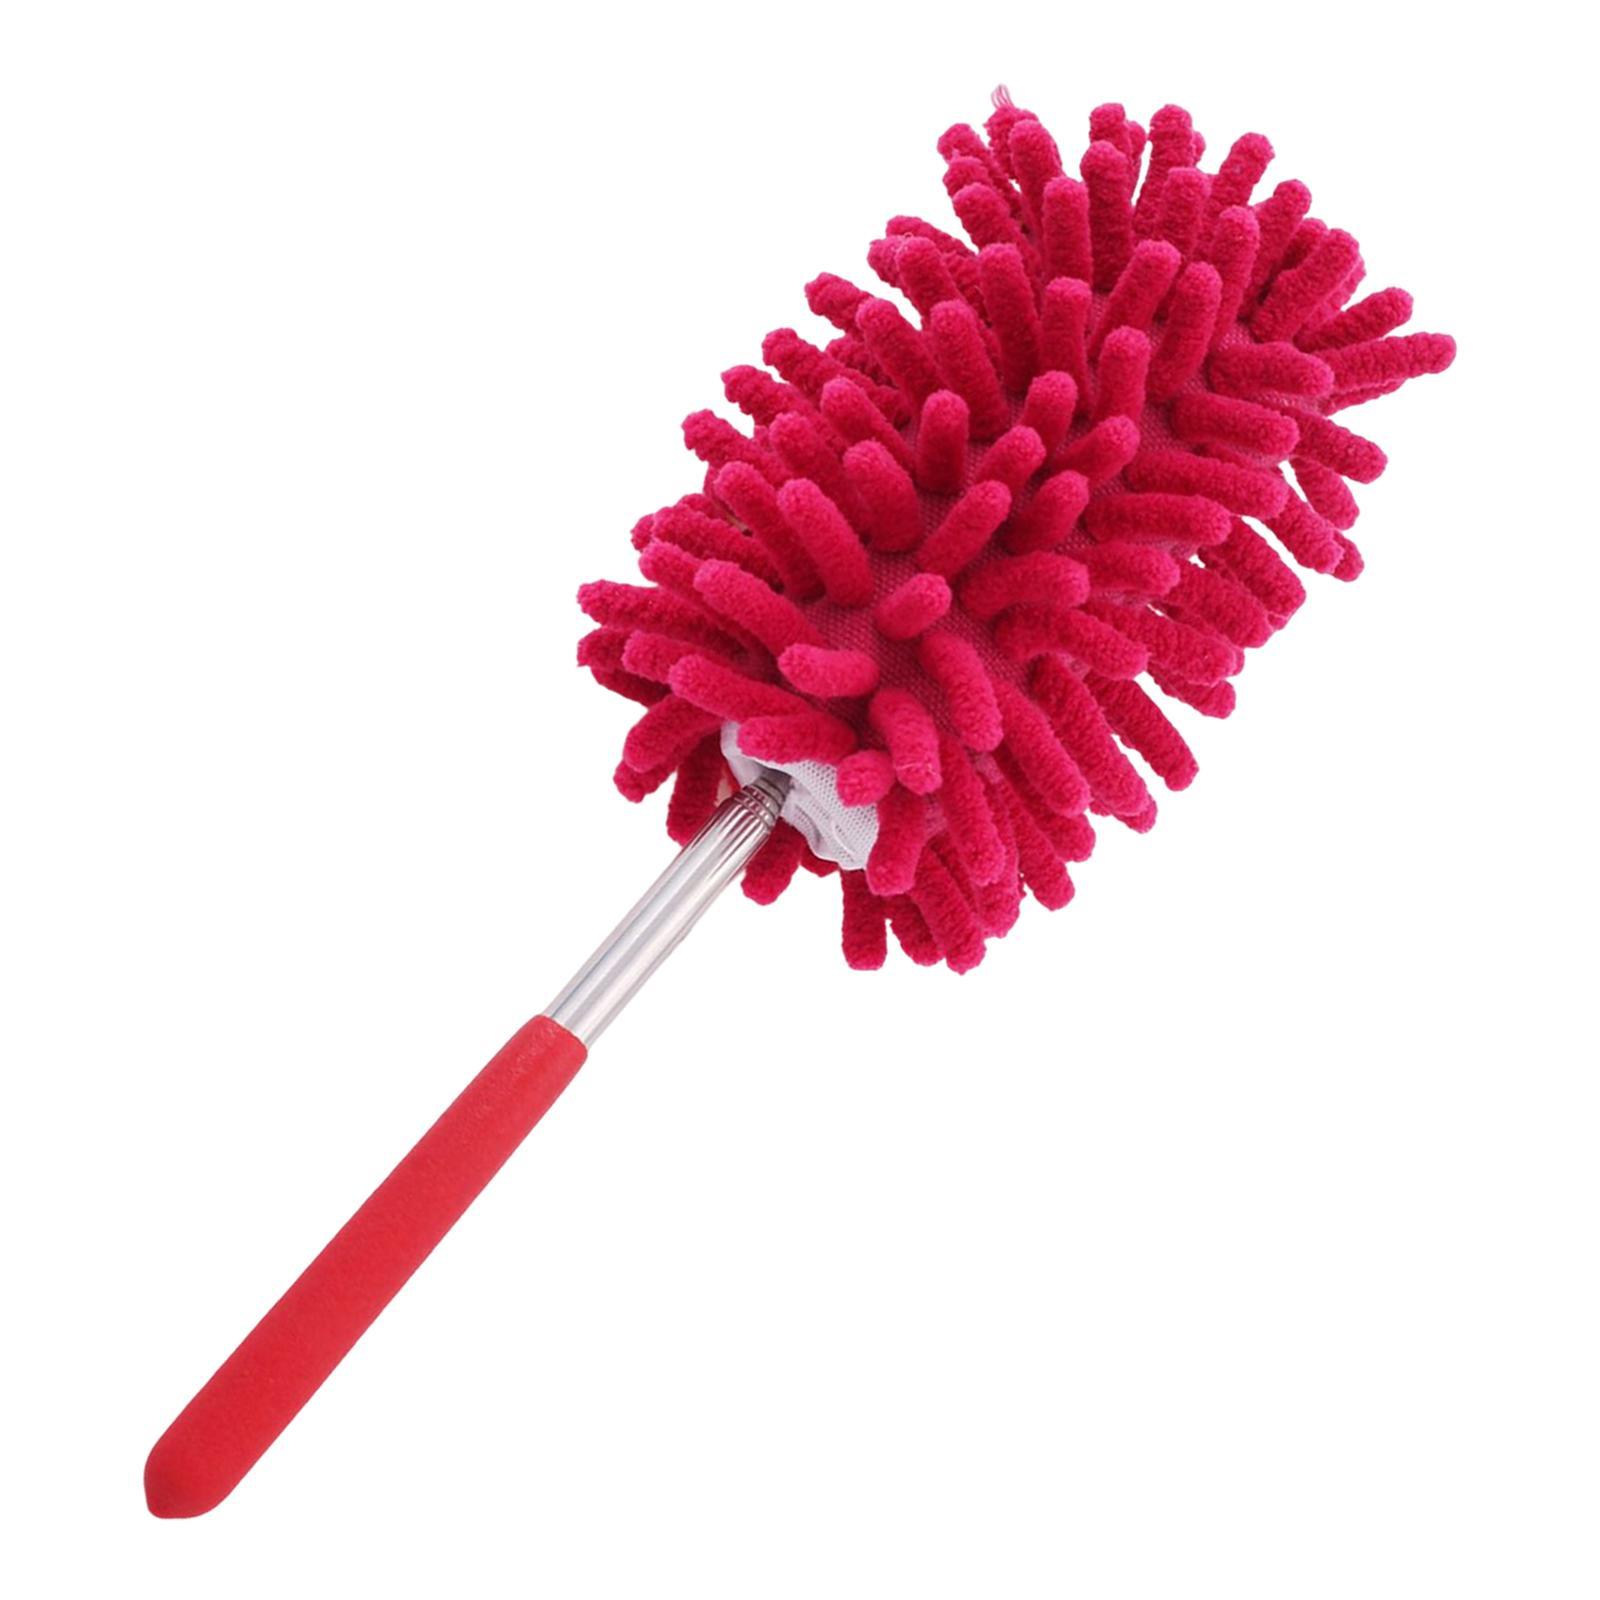 Dust Cleaner Cleaning Tool Housework Cleaning for Kitchen Household Office